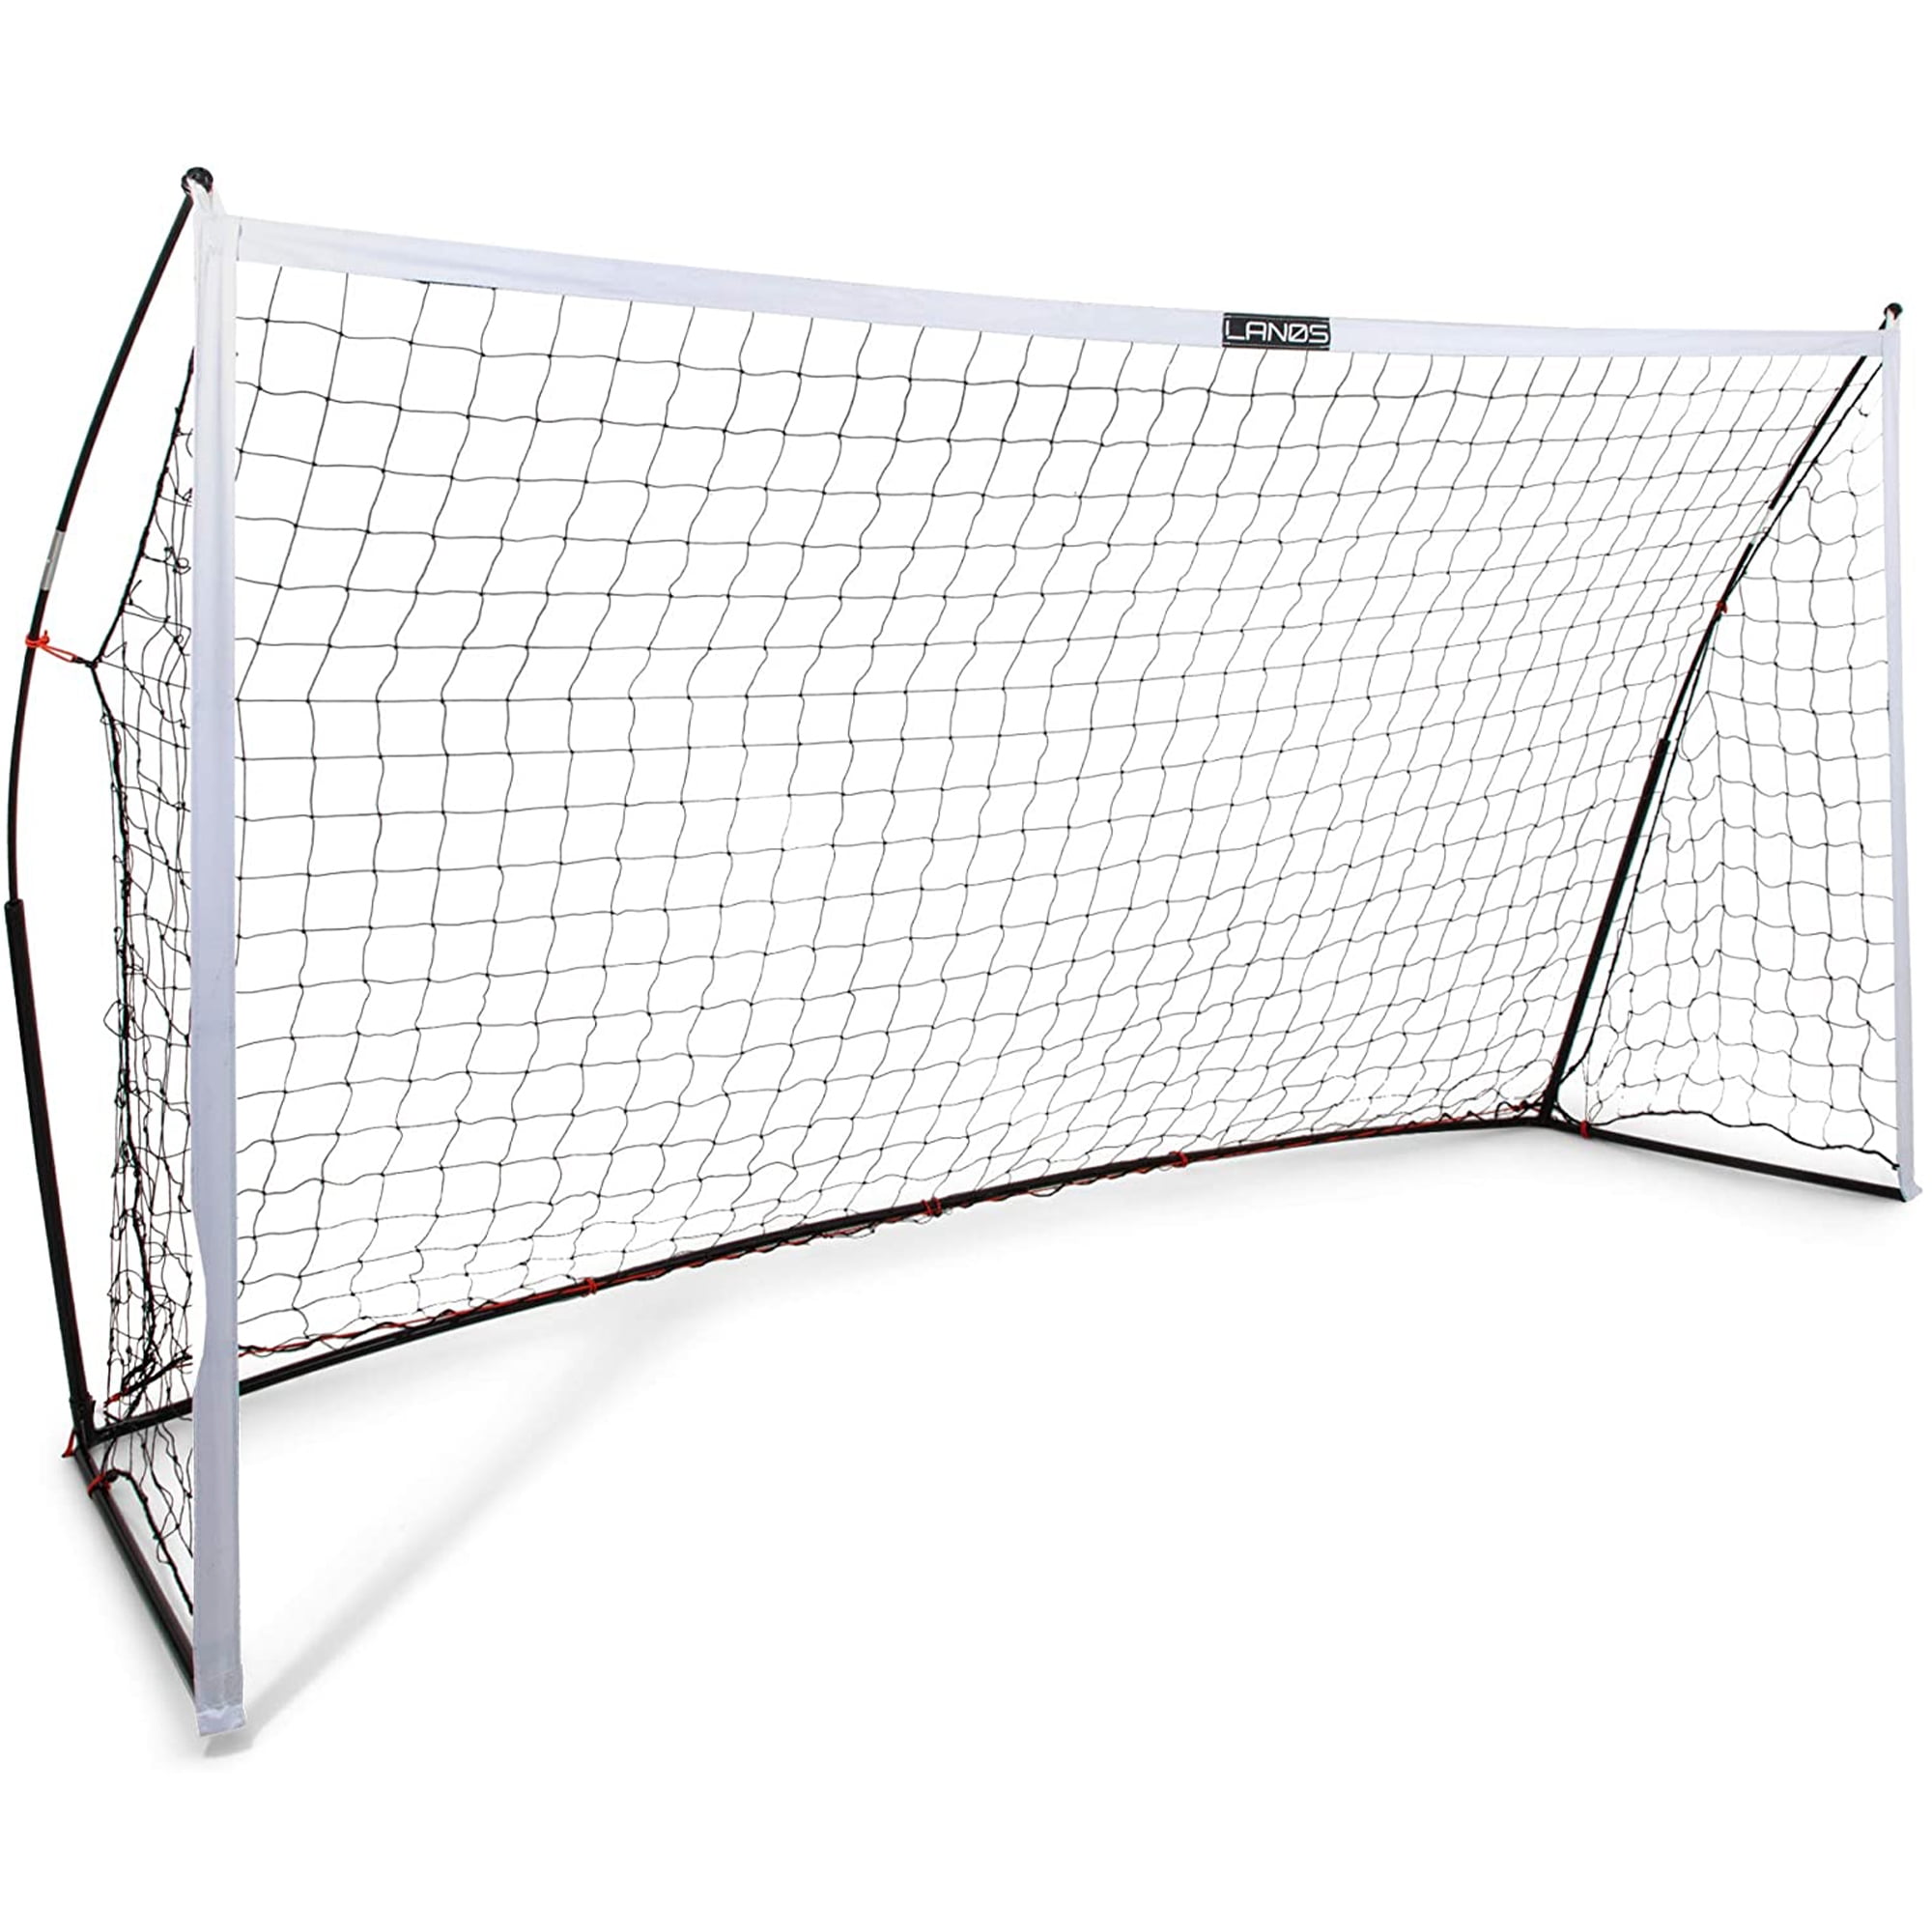 Lightweight Soccer Net with Pre-Connected Posts Carry Bag Premium Soccer Goal and Soccer Training Equipment for Kids and Adults Lanos Portable Soccer Goals for Backyard 